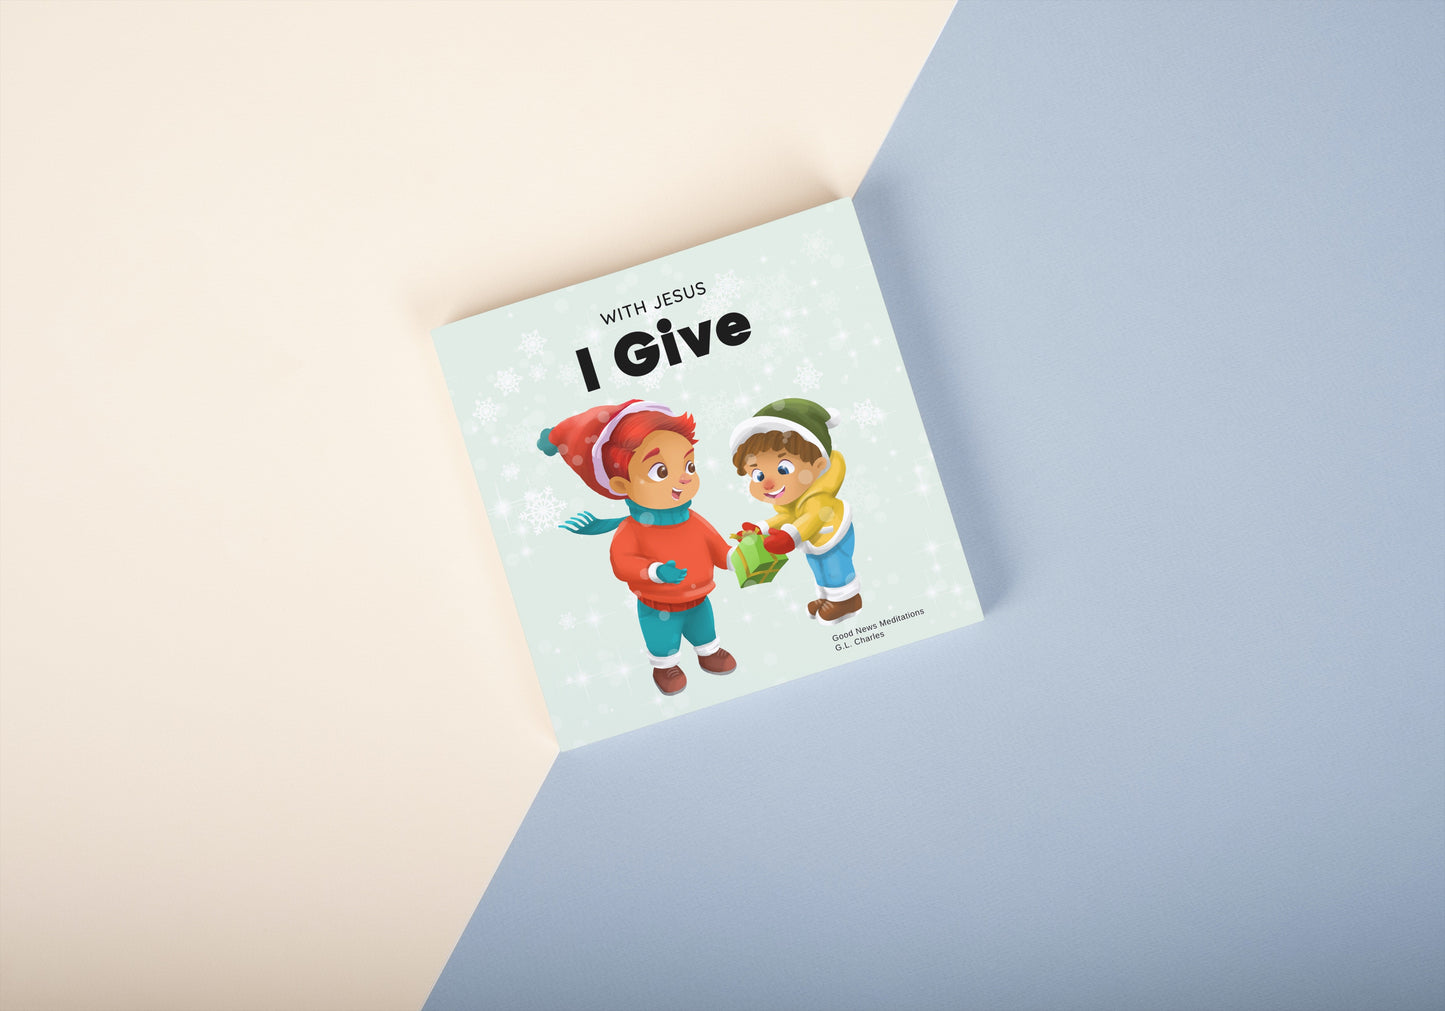 With Jesus I Give - Printed in UK